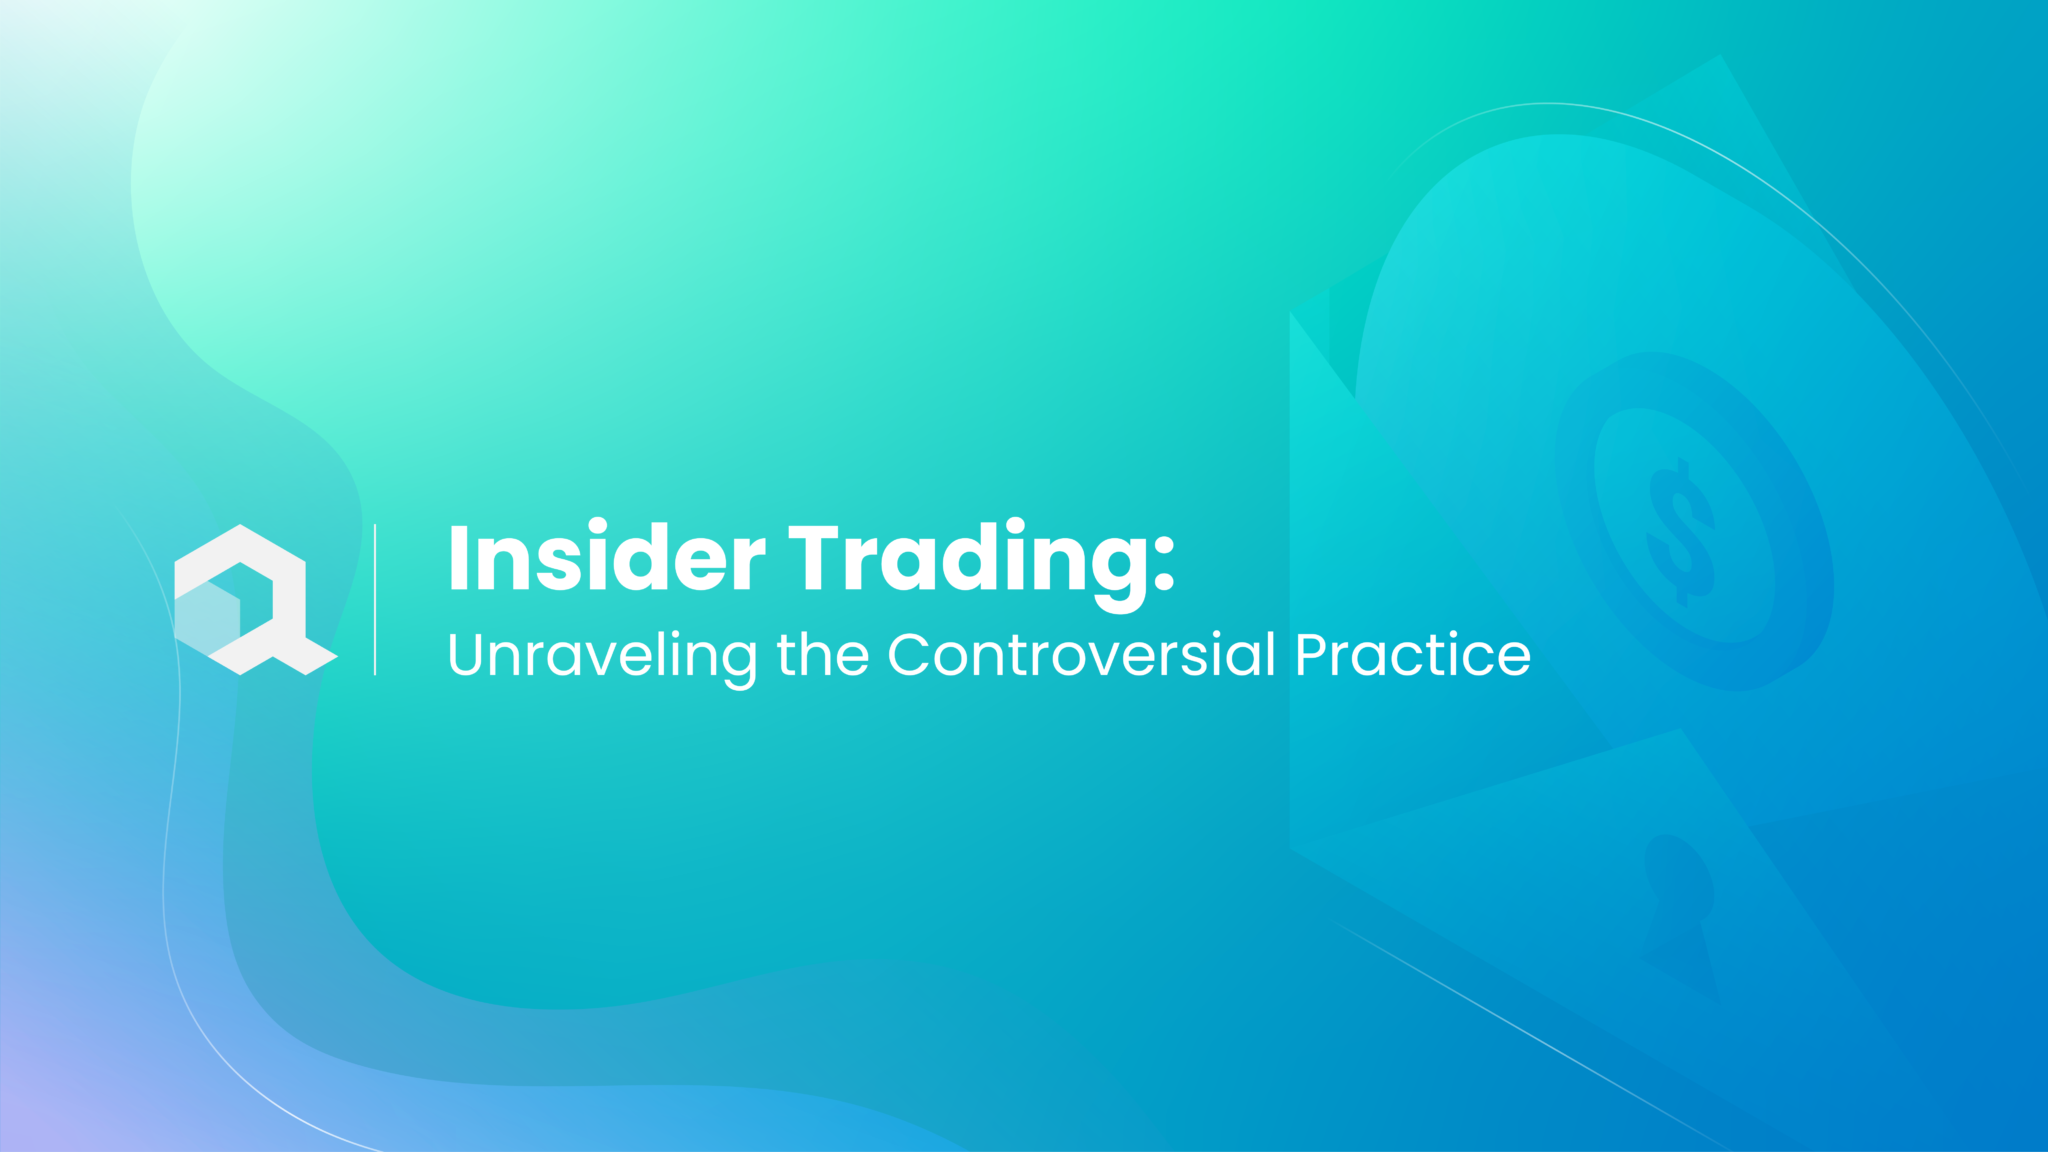 3 Multiple Perspectives on Insider Trading